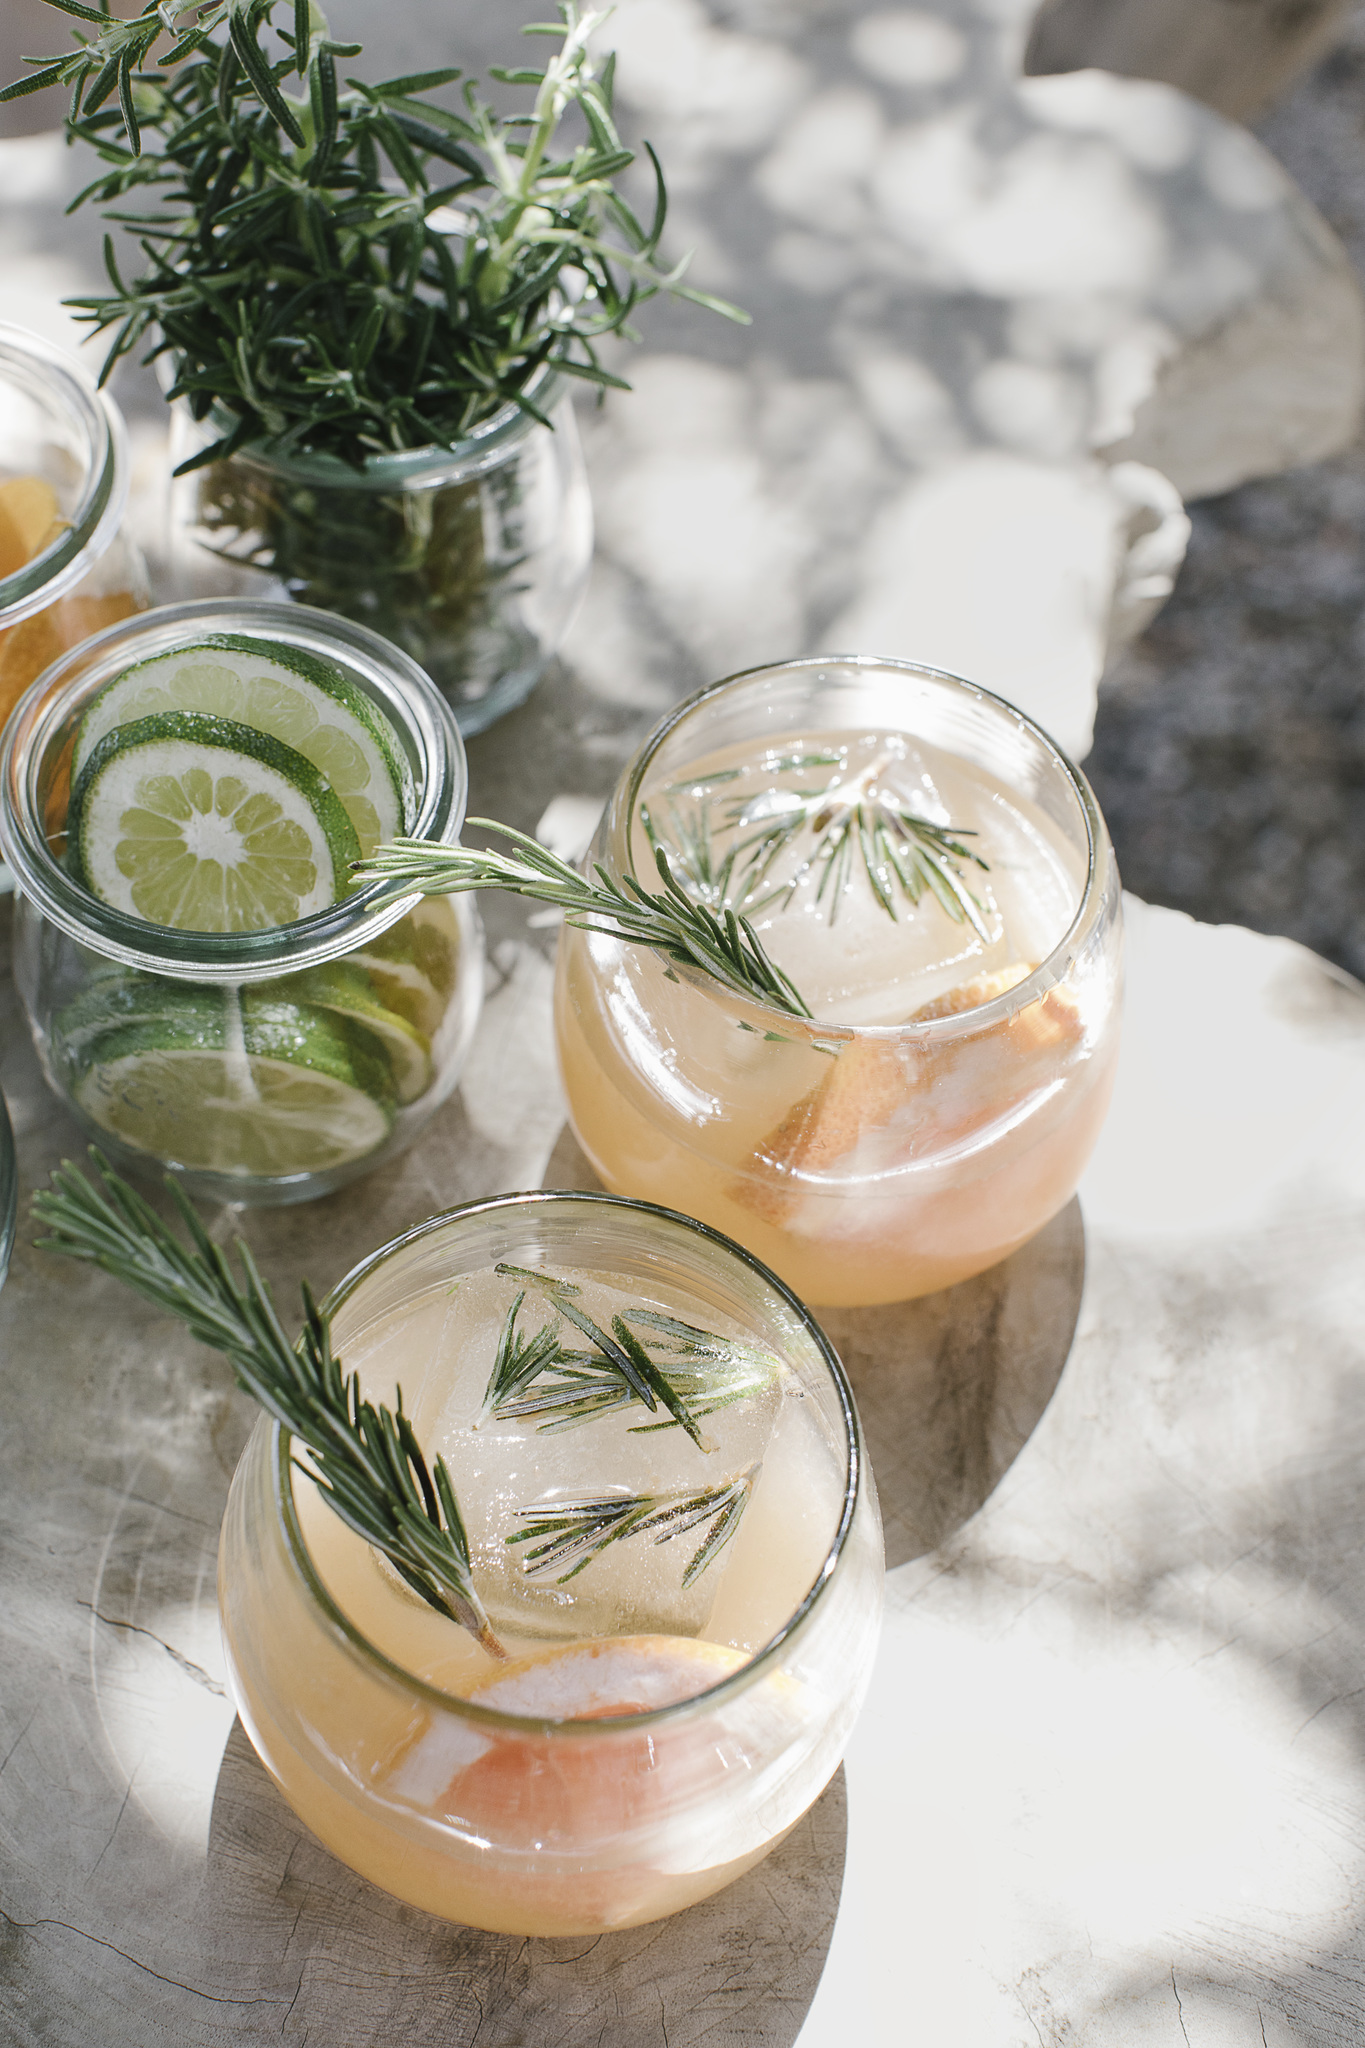 Organic Cali style by Jenni Kayne for these styled cocktails with rosemary - in PACIFIC NATURAL (Rizzoli, 2019).